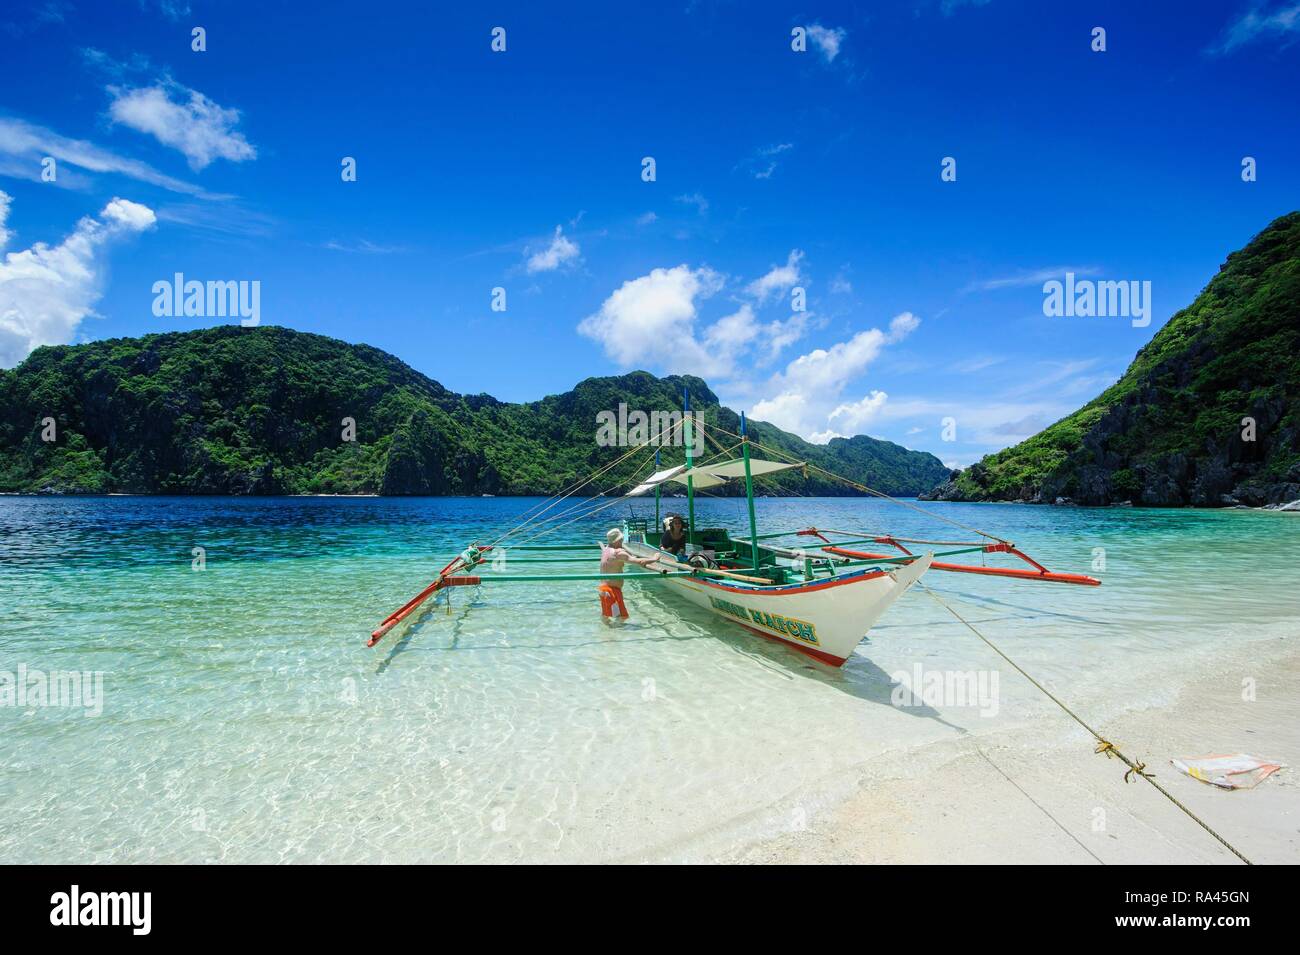 Outrigger boat in the crystal clear water in the Bacuit archipelago, Palawan, Philippines Stock Photo